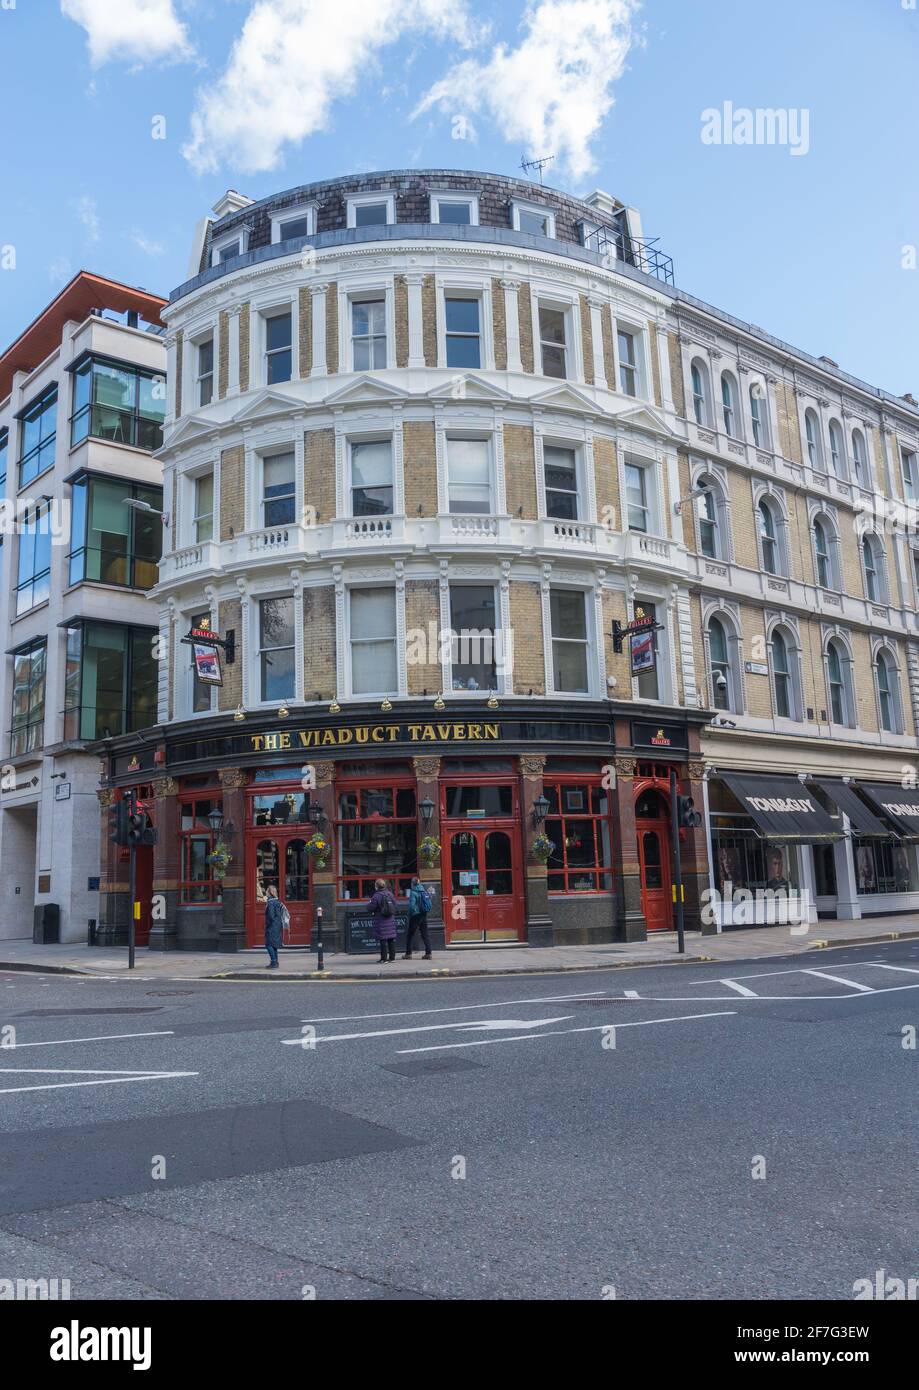 Exterior of The Viaduct Tavern,a Victorian pub and traditional Gin Palace on the corner of Newgate Street and Giltspur Street, London, England, UK Stock Photo